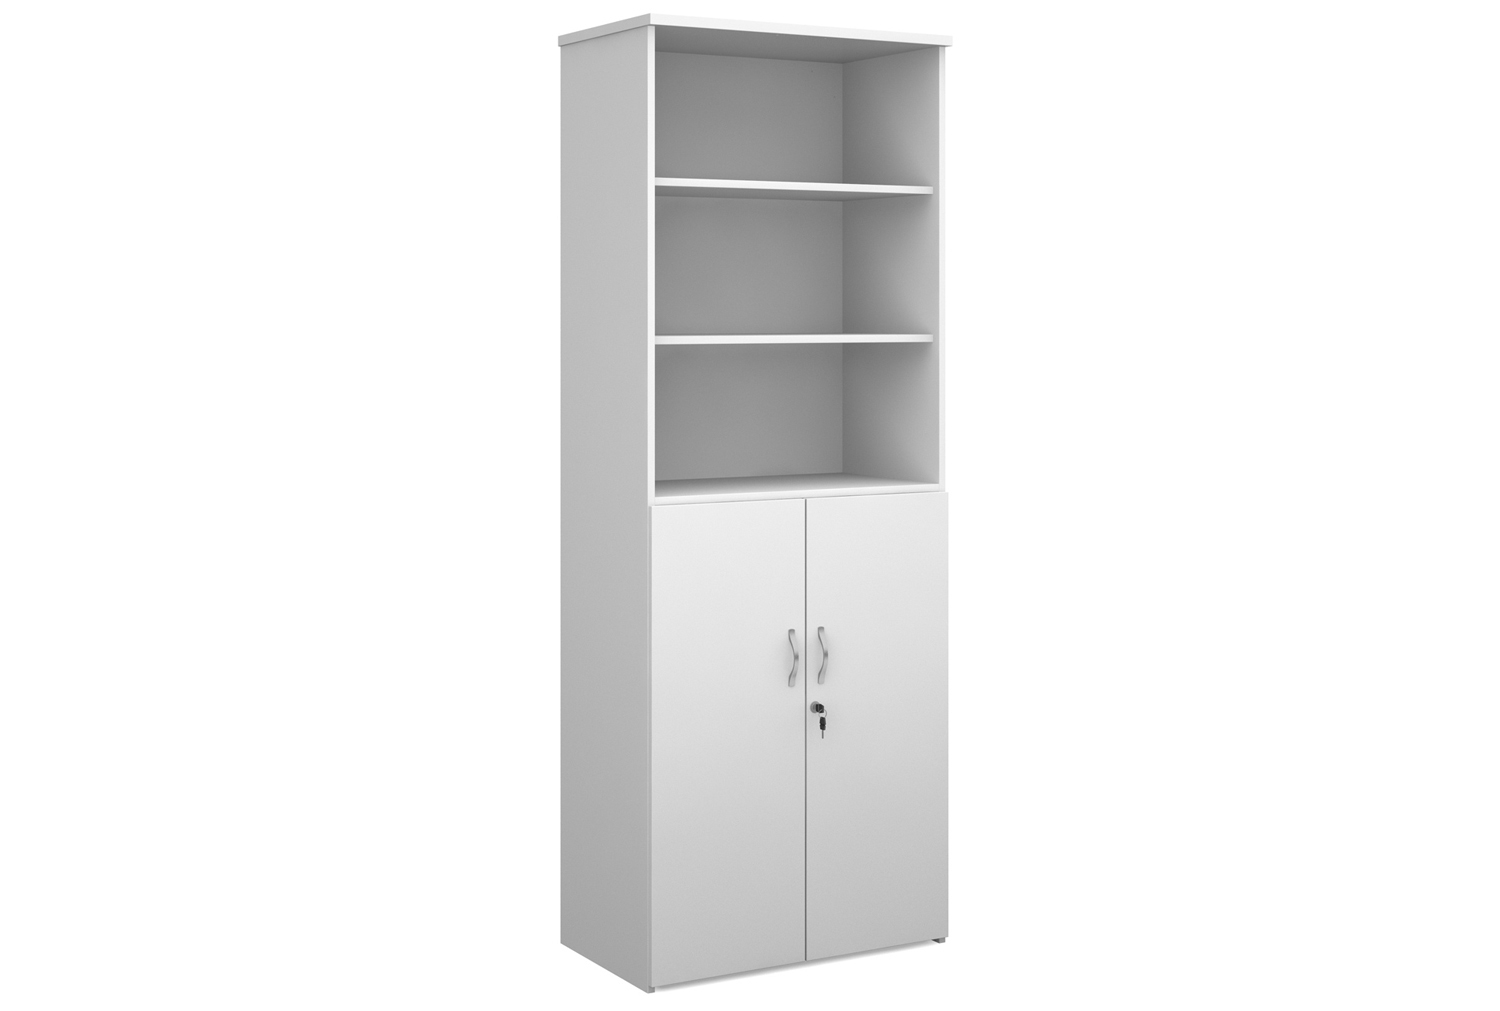 All White Open Top Office Cupboards, 5 Shelf - 80wx47dx214h (cm), Fully Installed